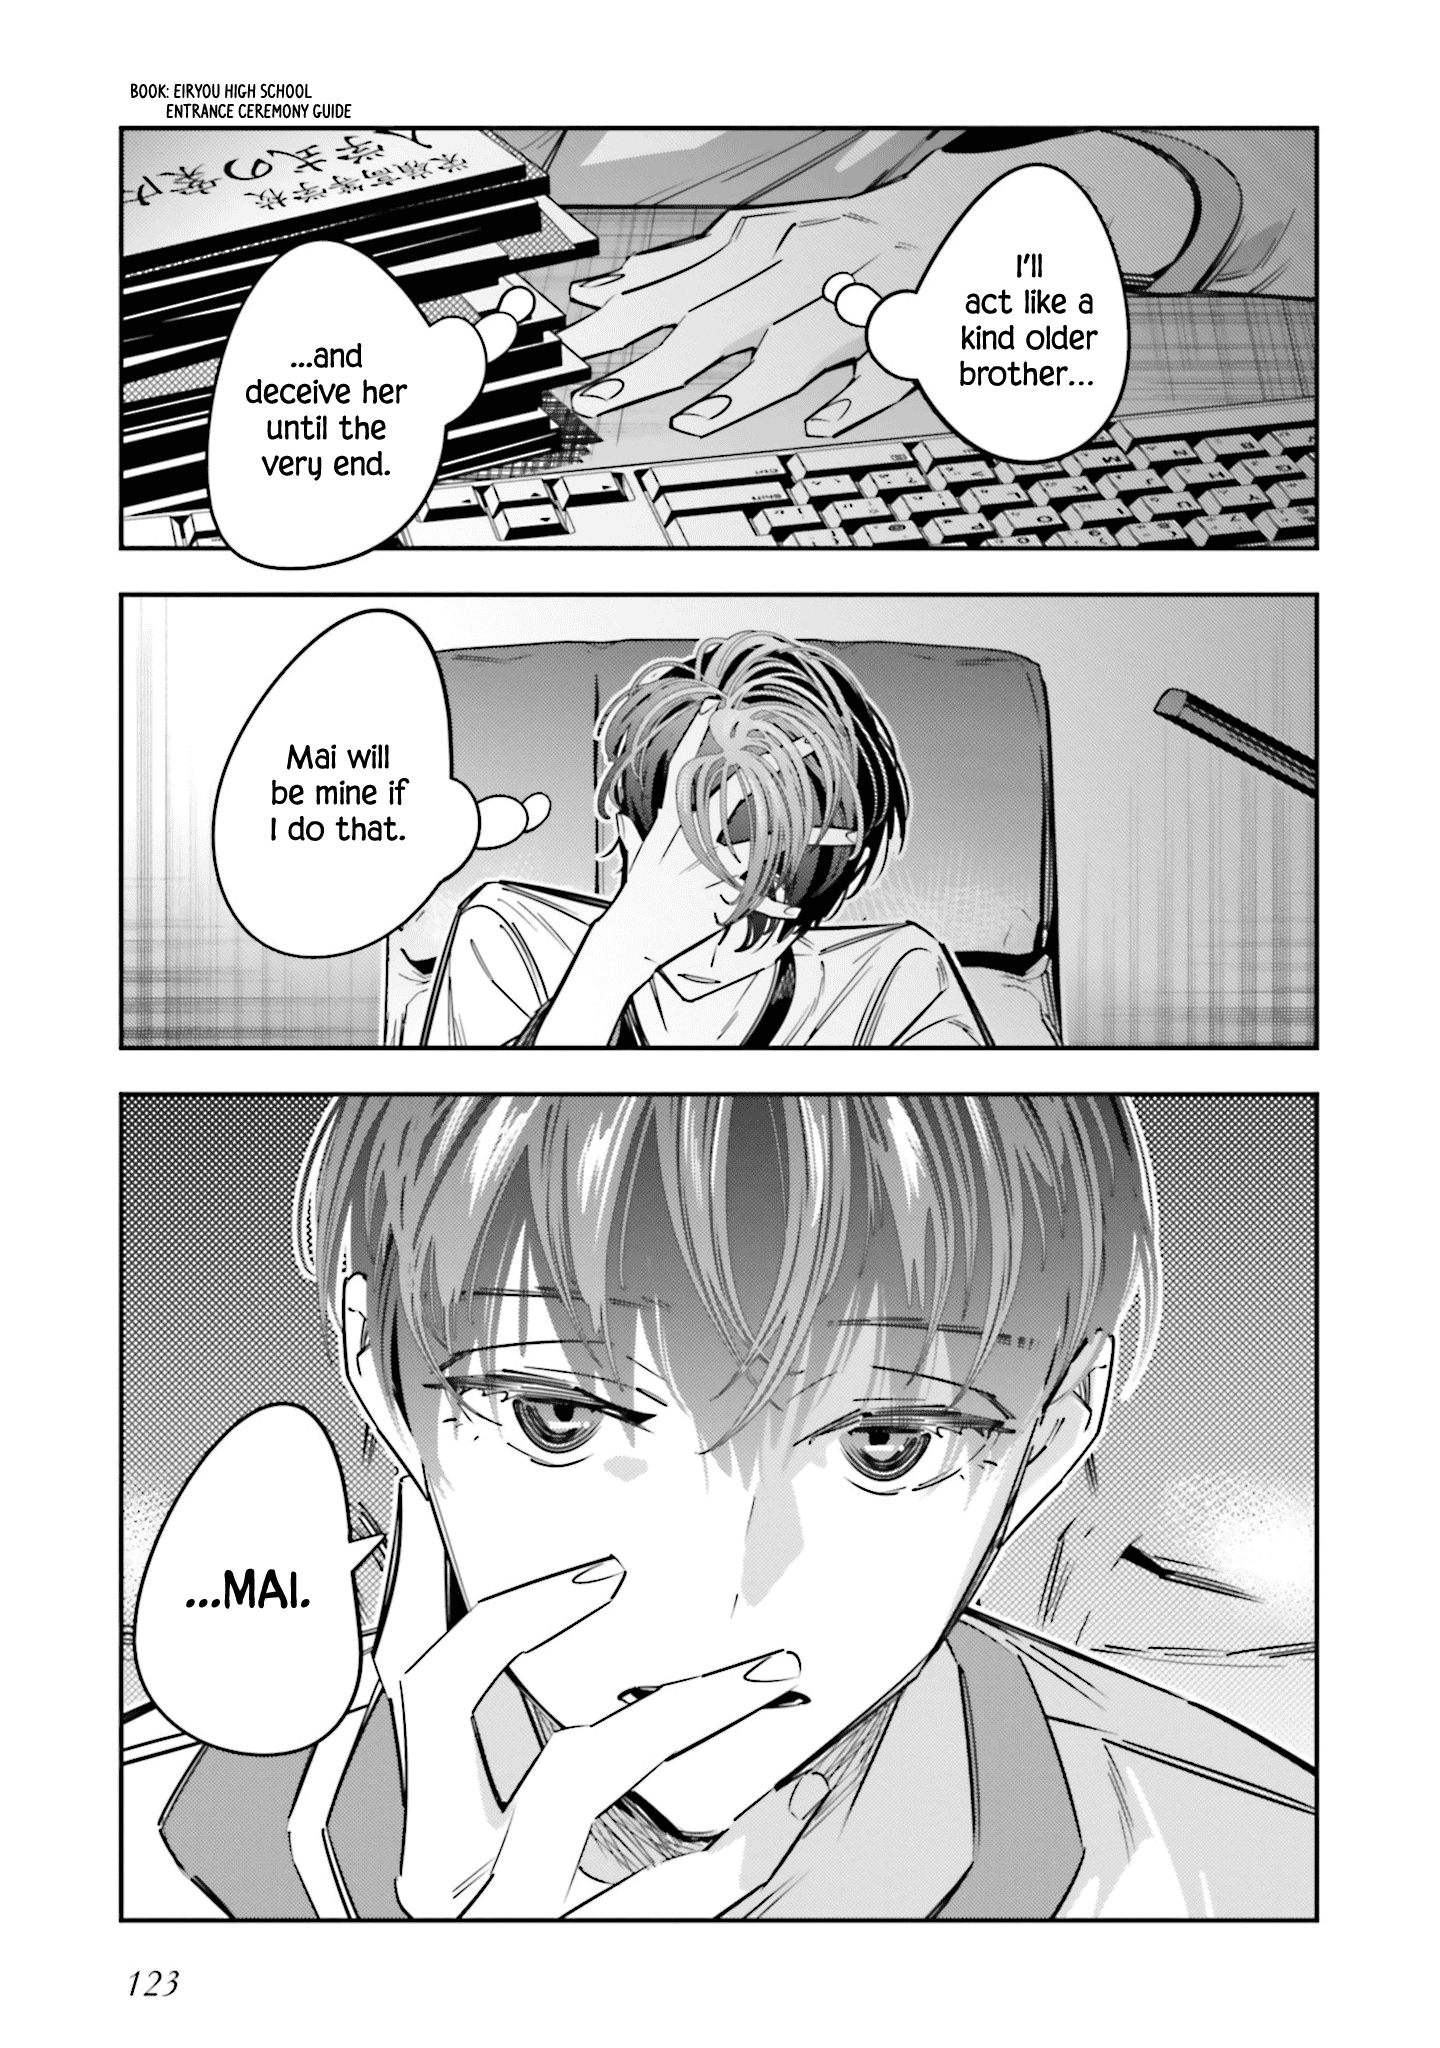 I Reincarnated As The Little Sister Of A Death Game Manga's Murder Mastermind And Failed Chapter 9 #5